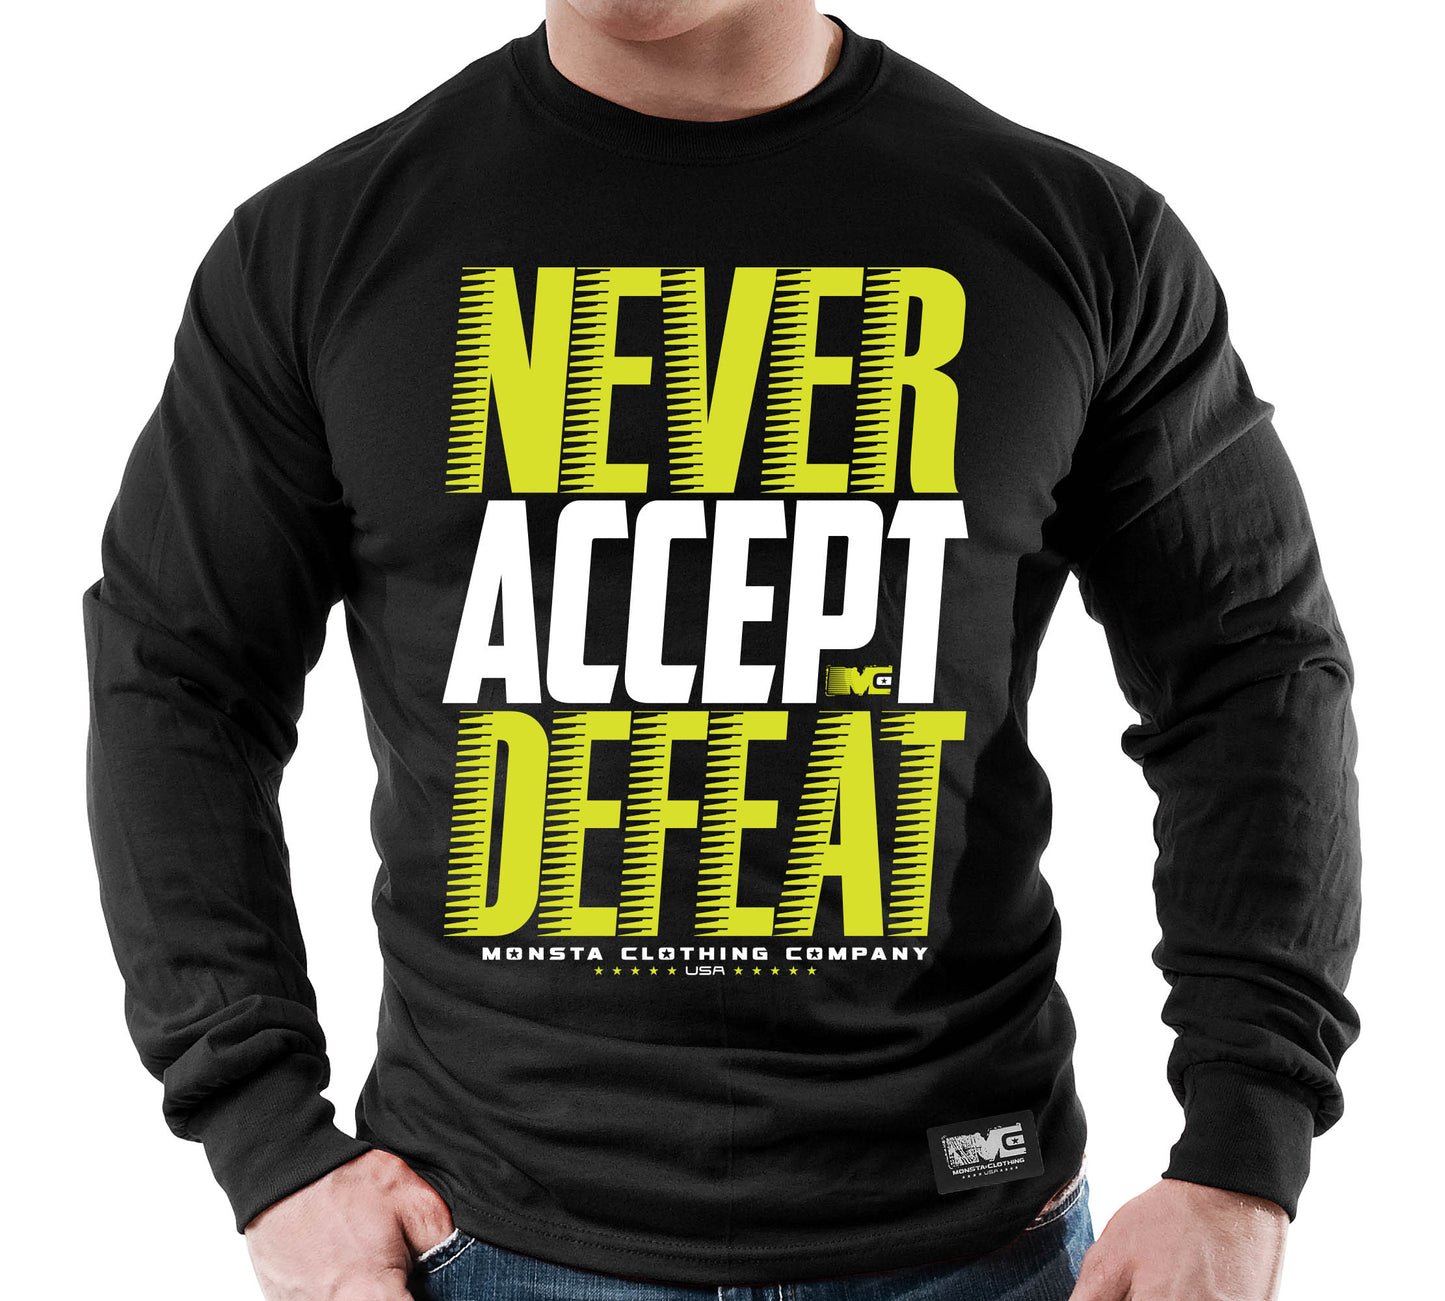 Never Accept Defeat-232: WT-Safety Yellow